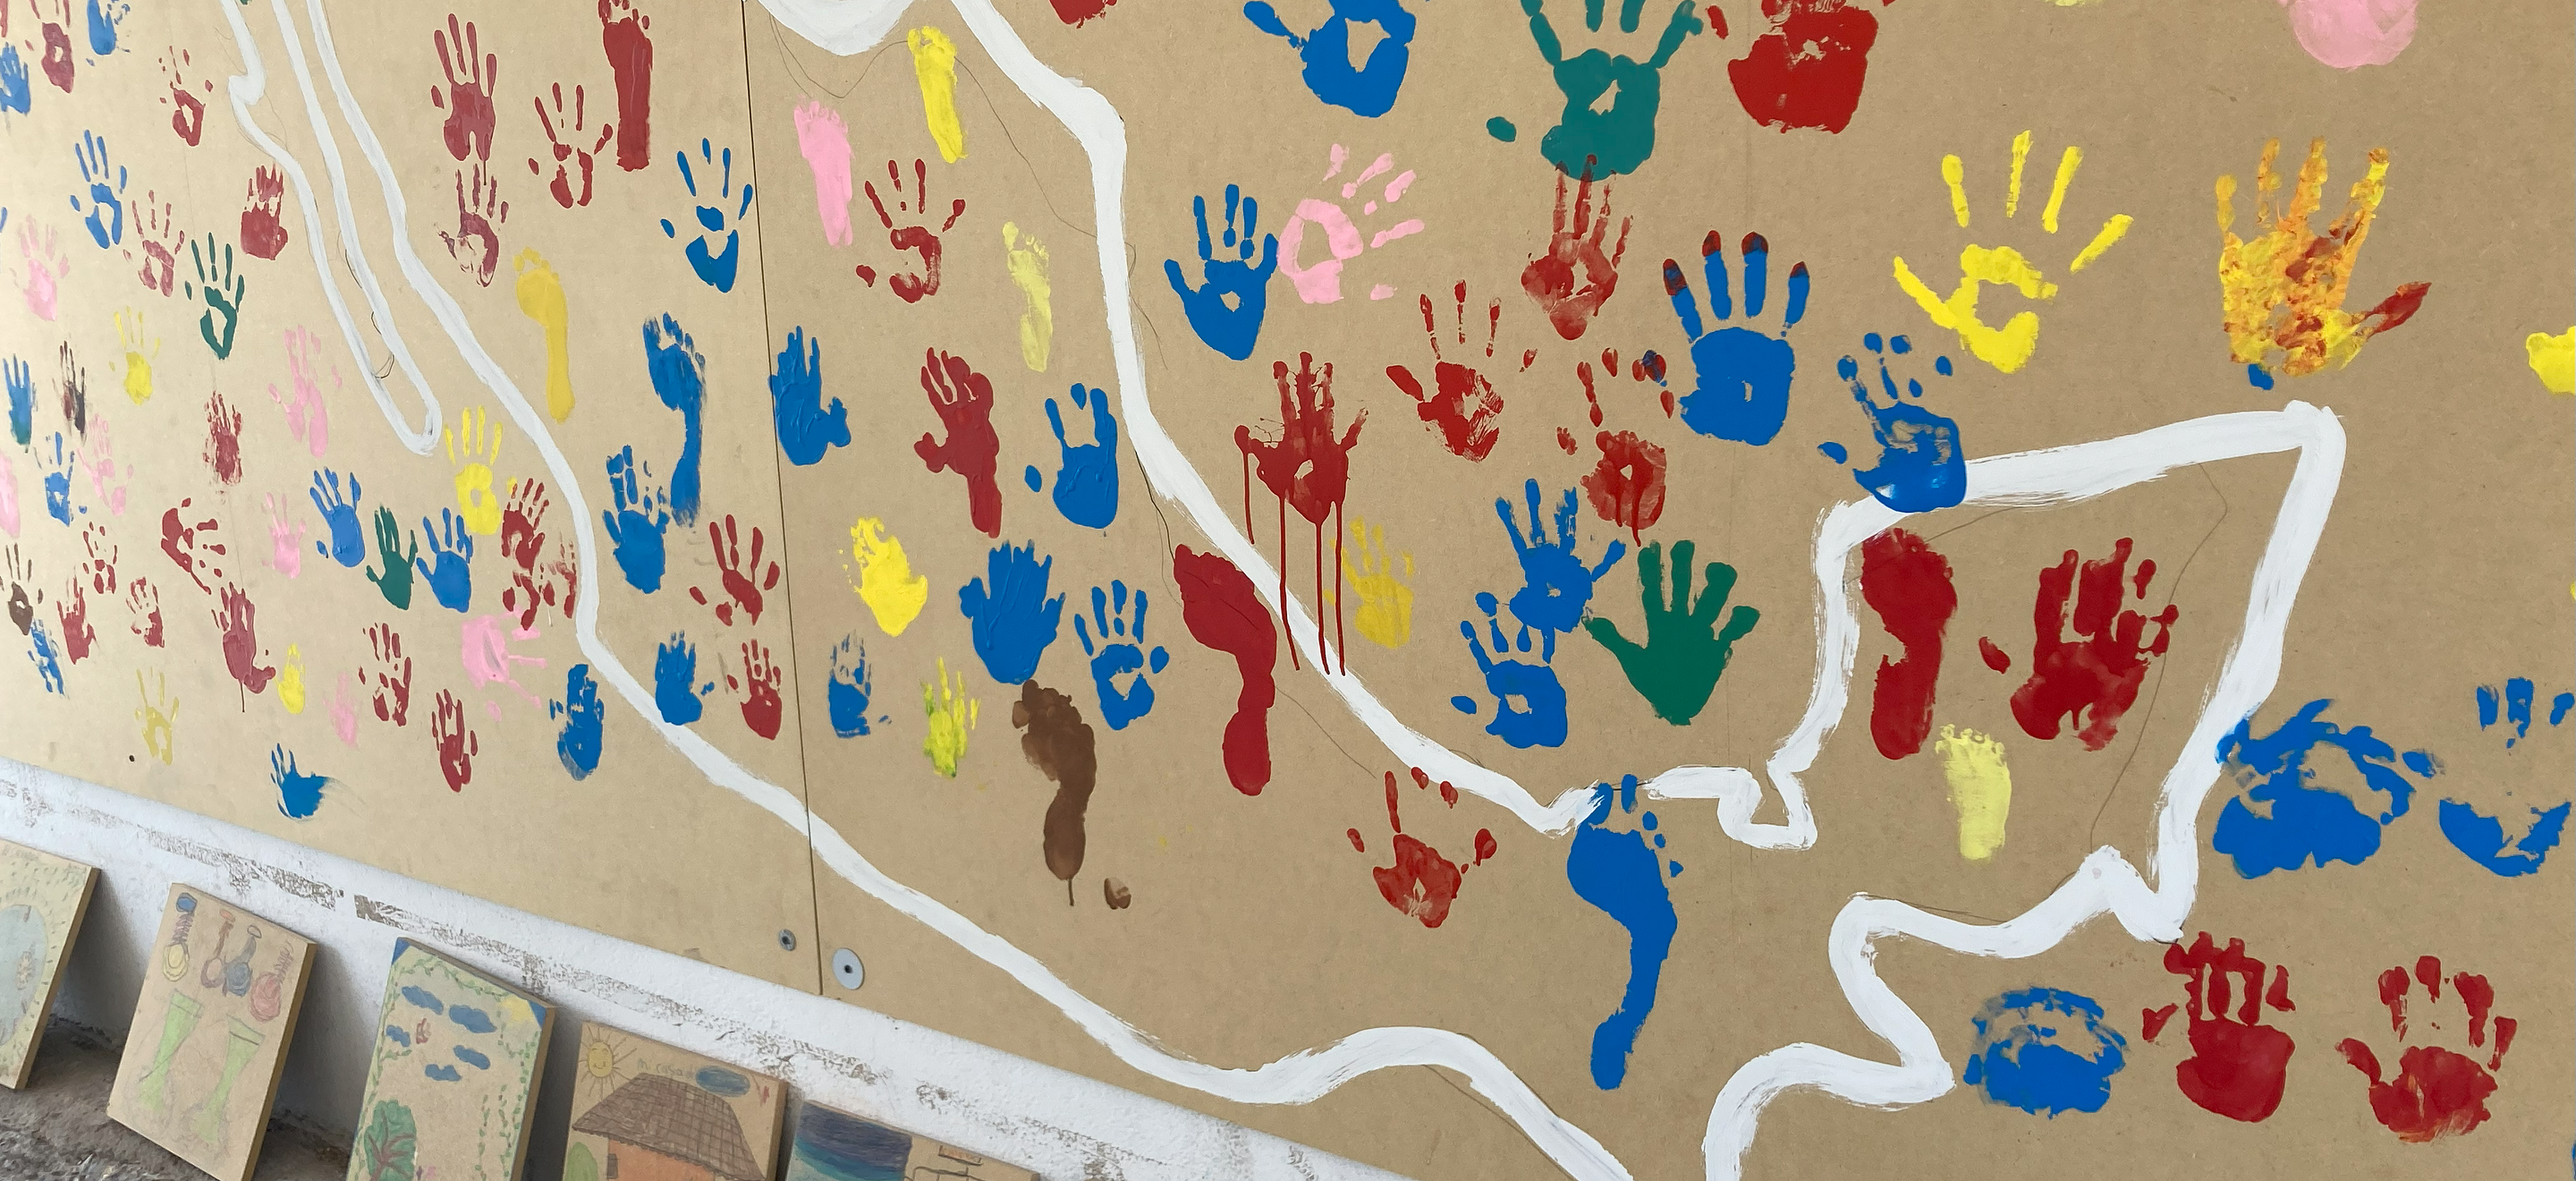 A photo of a children's mural project with handprints in different color paint across an outline of Mexico.